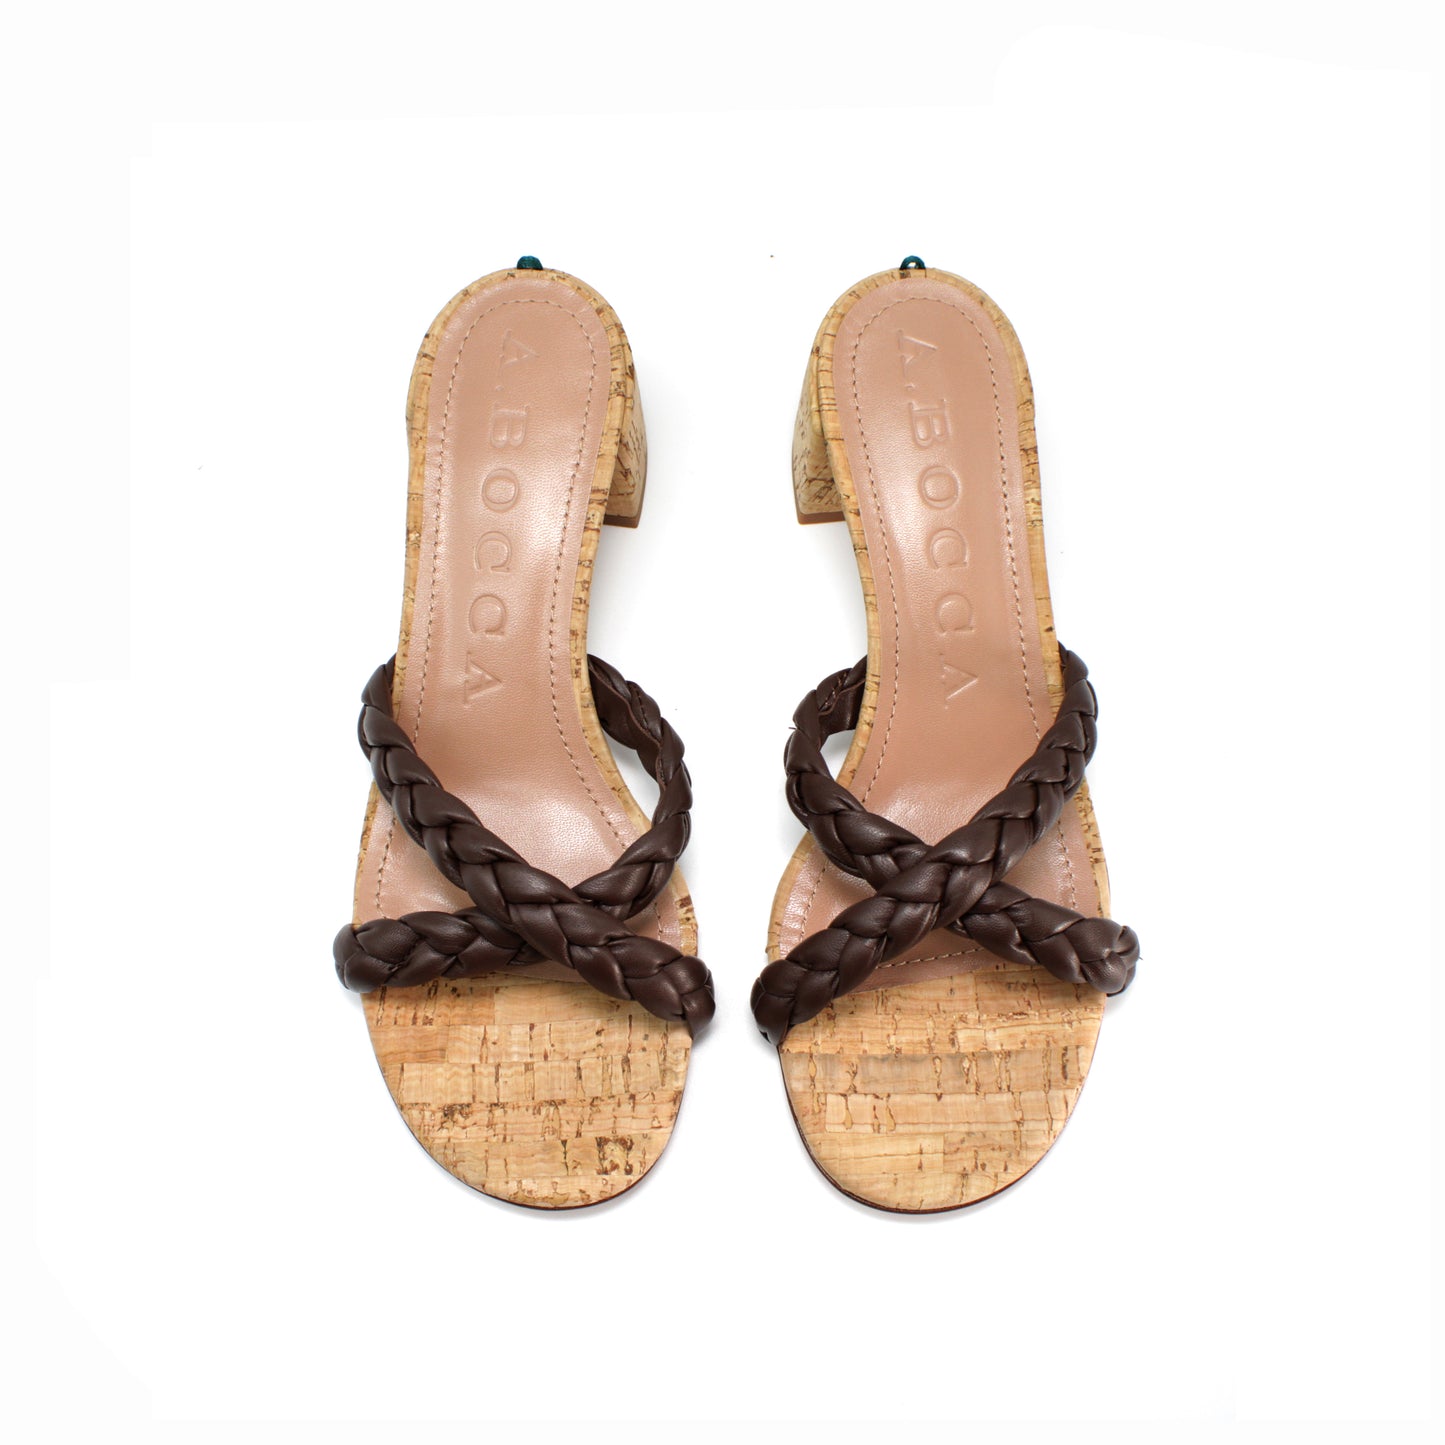 A.Bocca sandal in coffee napa leather and cork